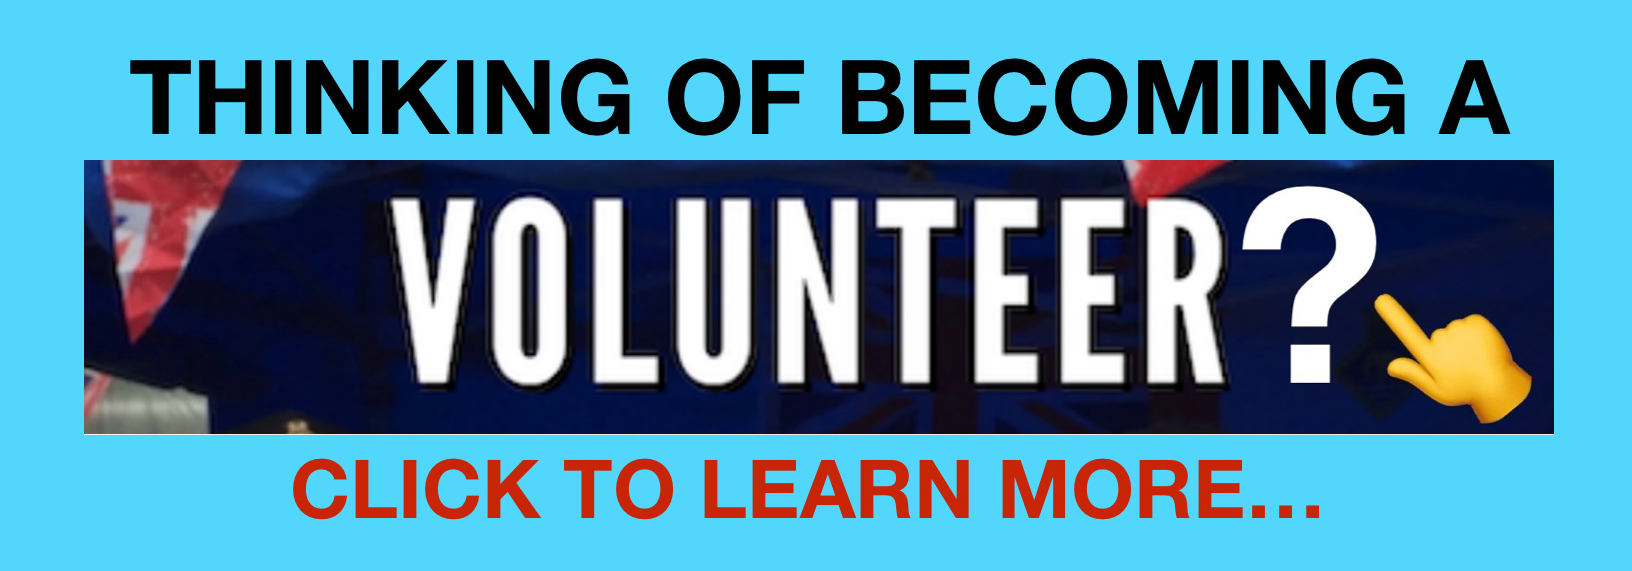 Thinking of Becoming A Volunteer?